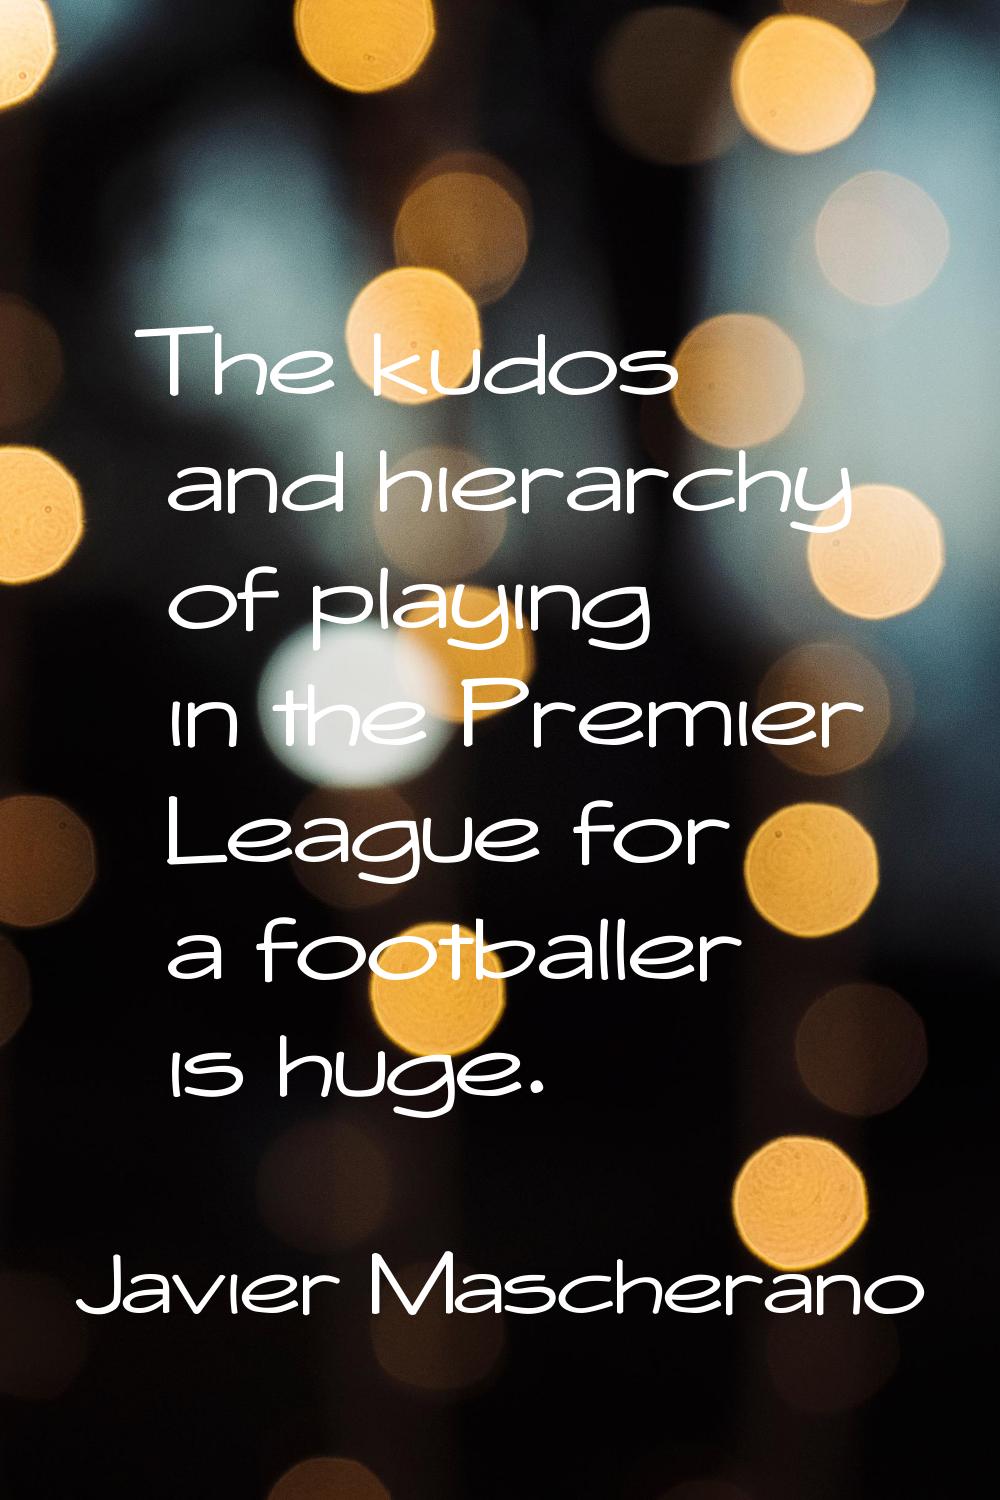 The kudos and hierarchy of playing in the Premier League for a footballer is huge.